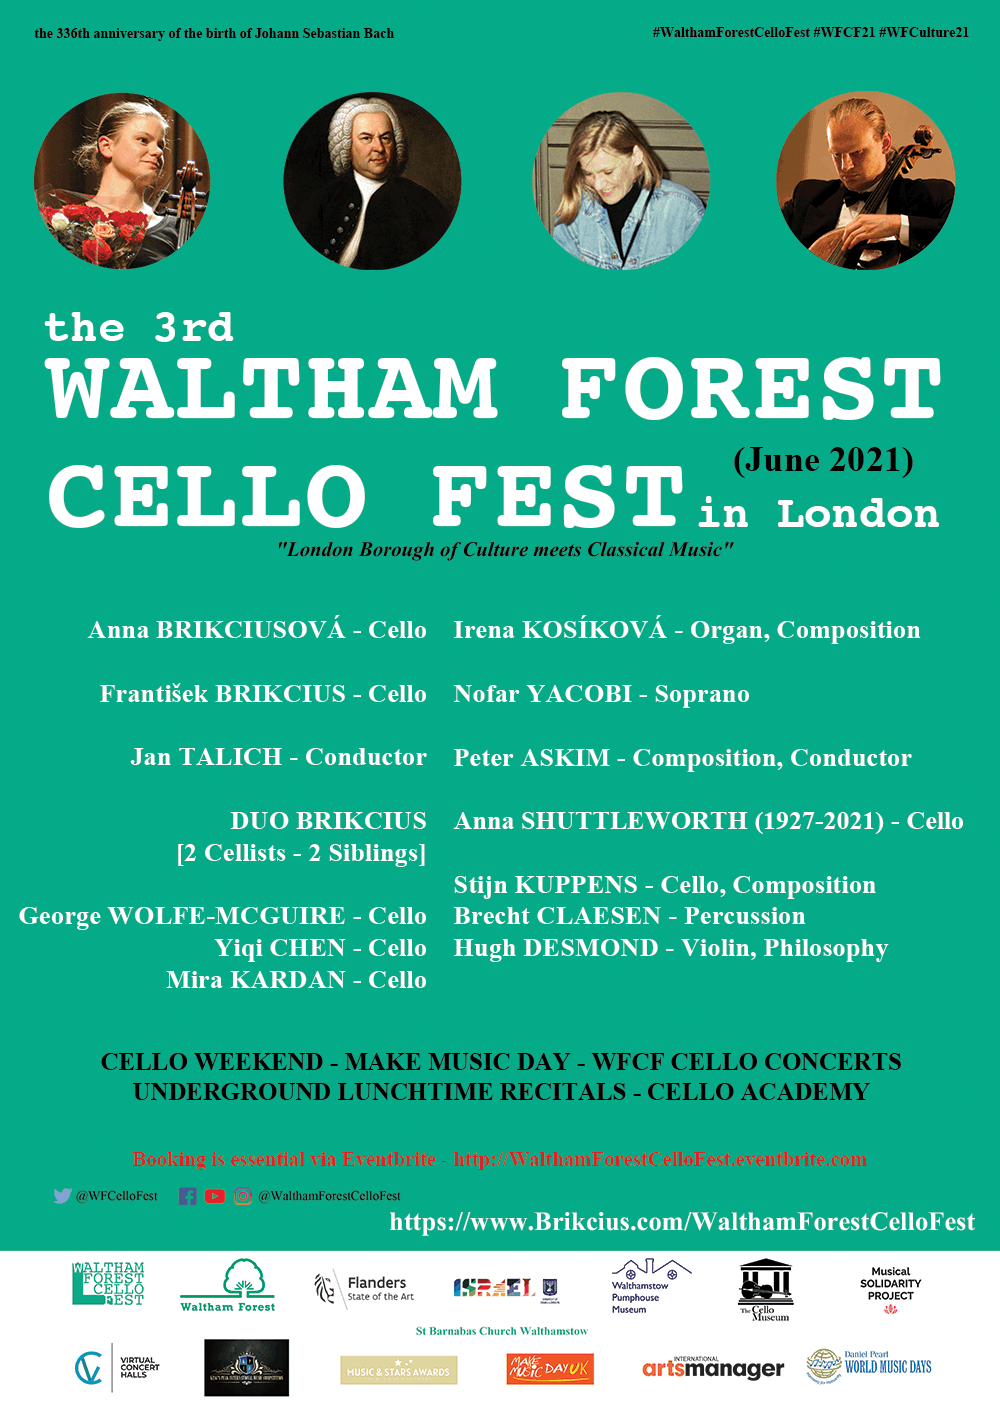 The 3rd WALTHAM FOREST CELLO FEST 2021 in London